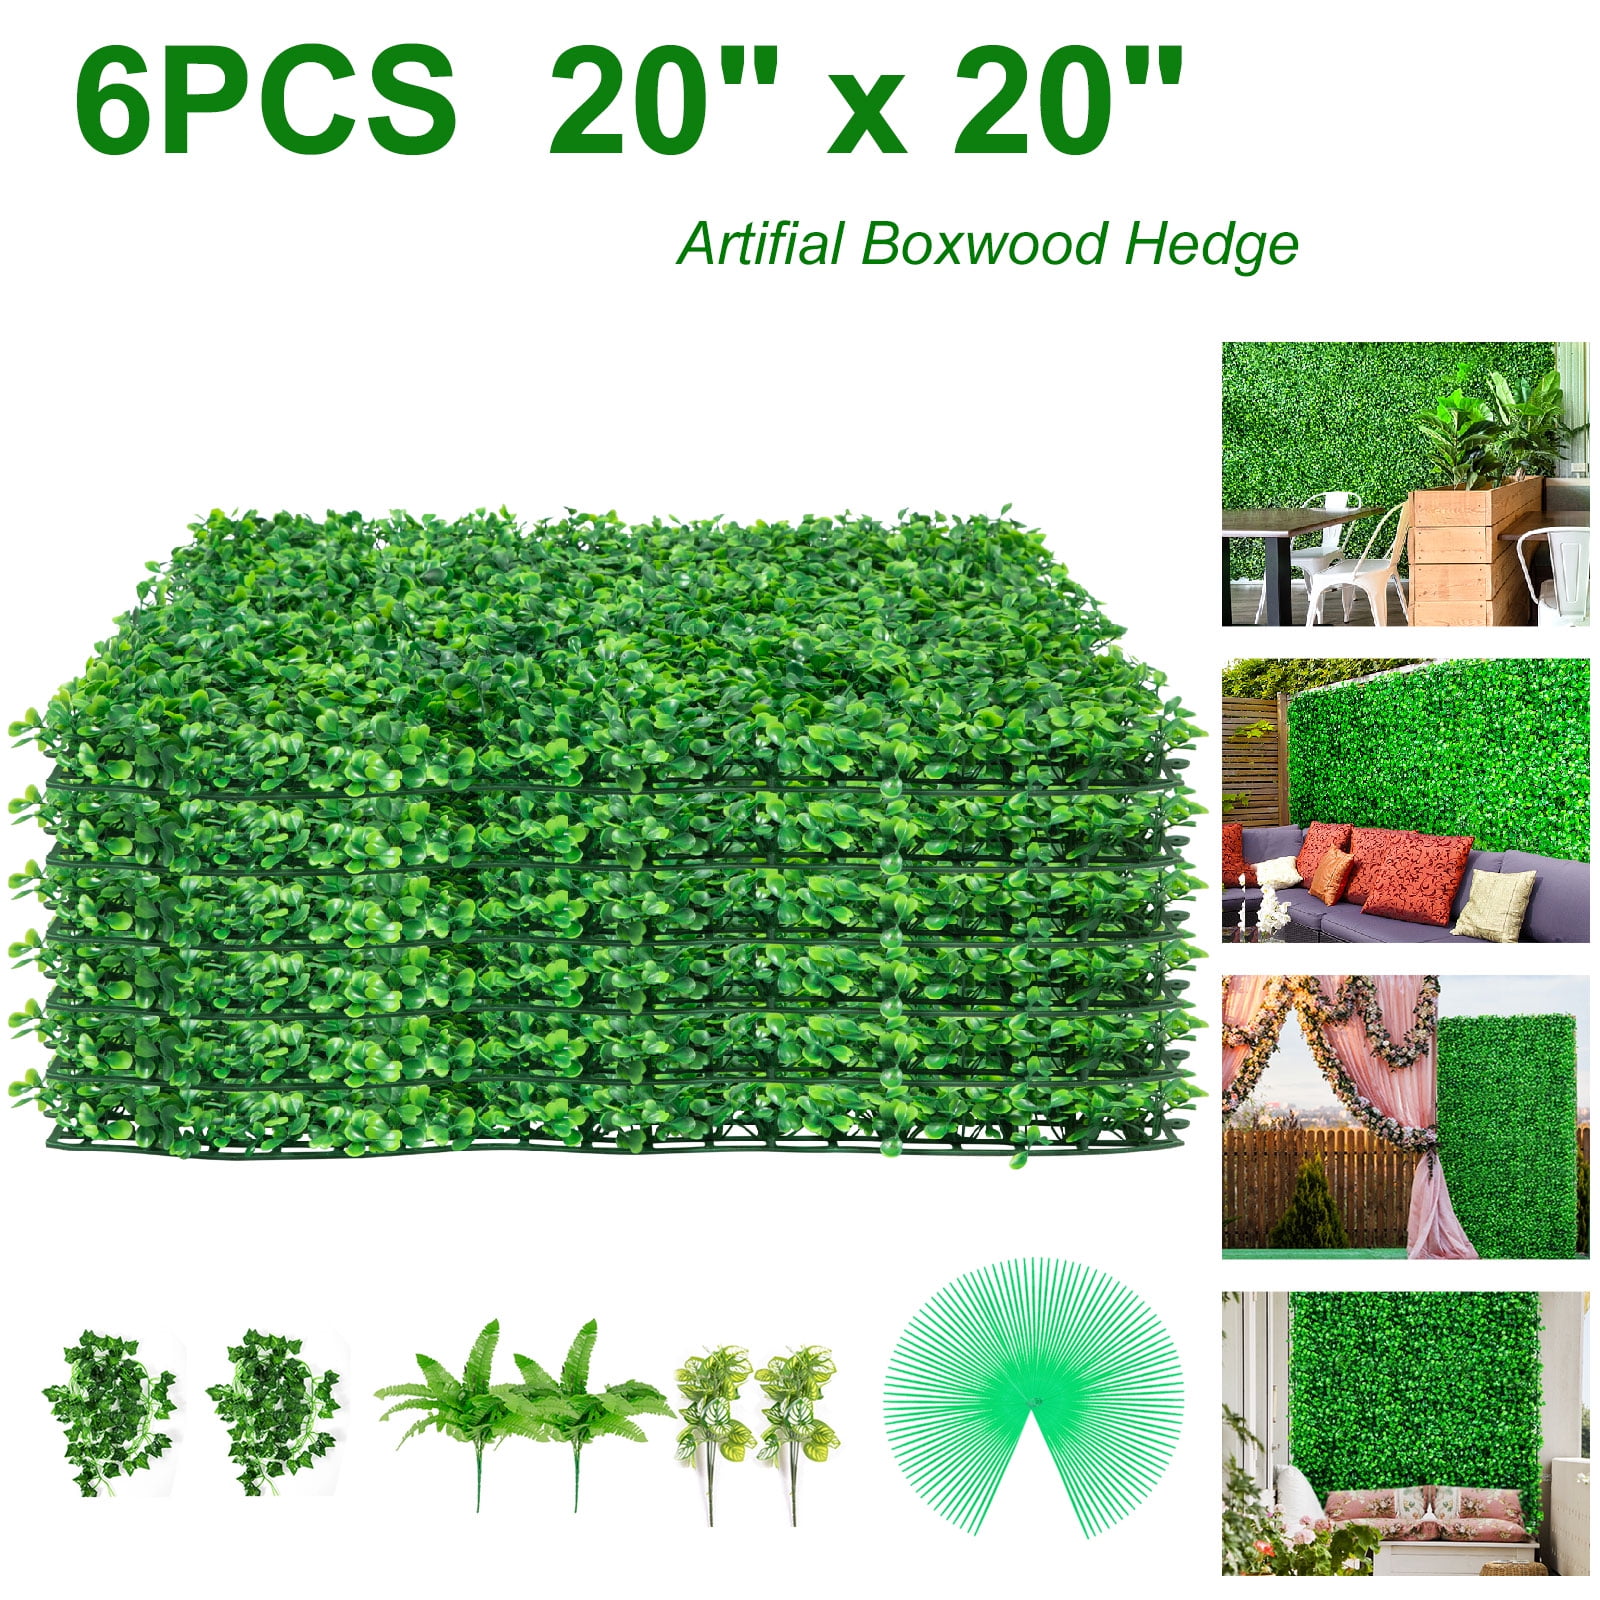 12 Pack Artificial Boxwood Mat Wall Hedge Decor Privacy Fence Panels Encrypted 